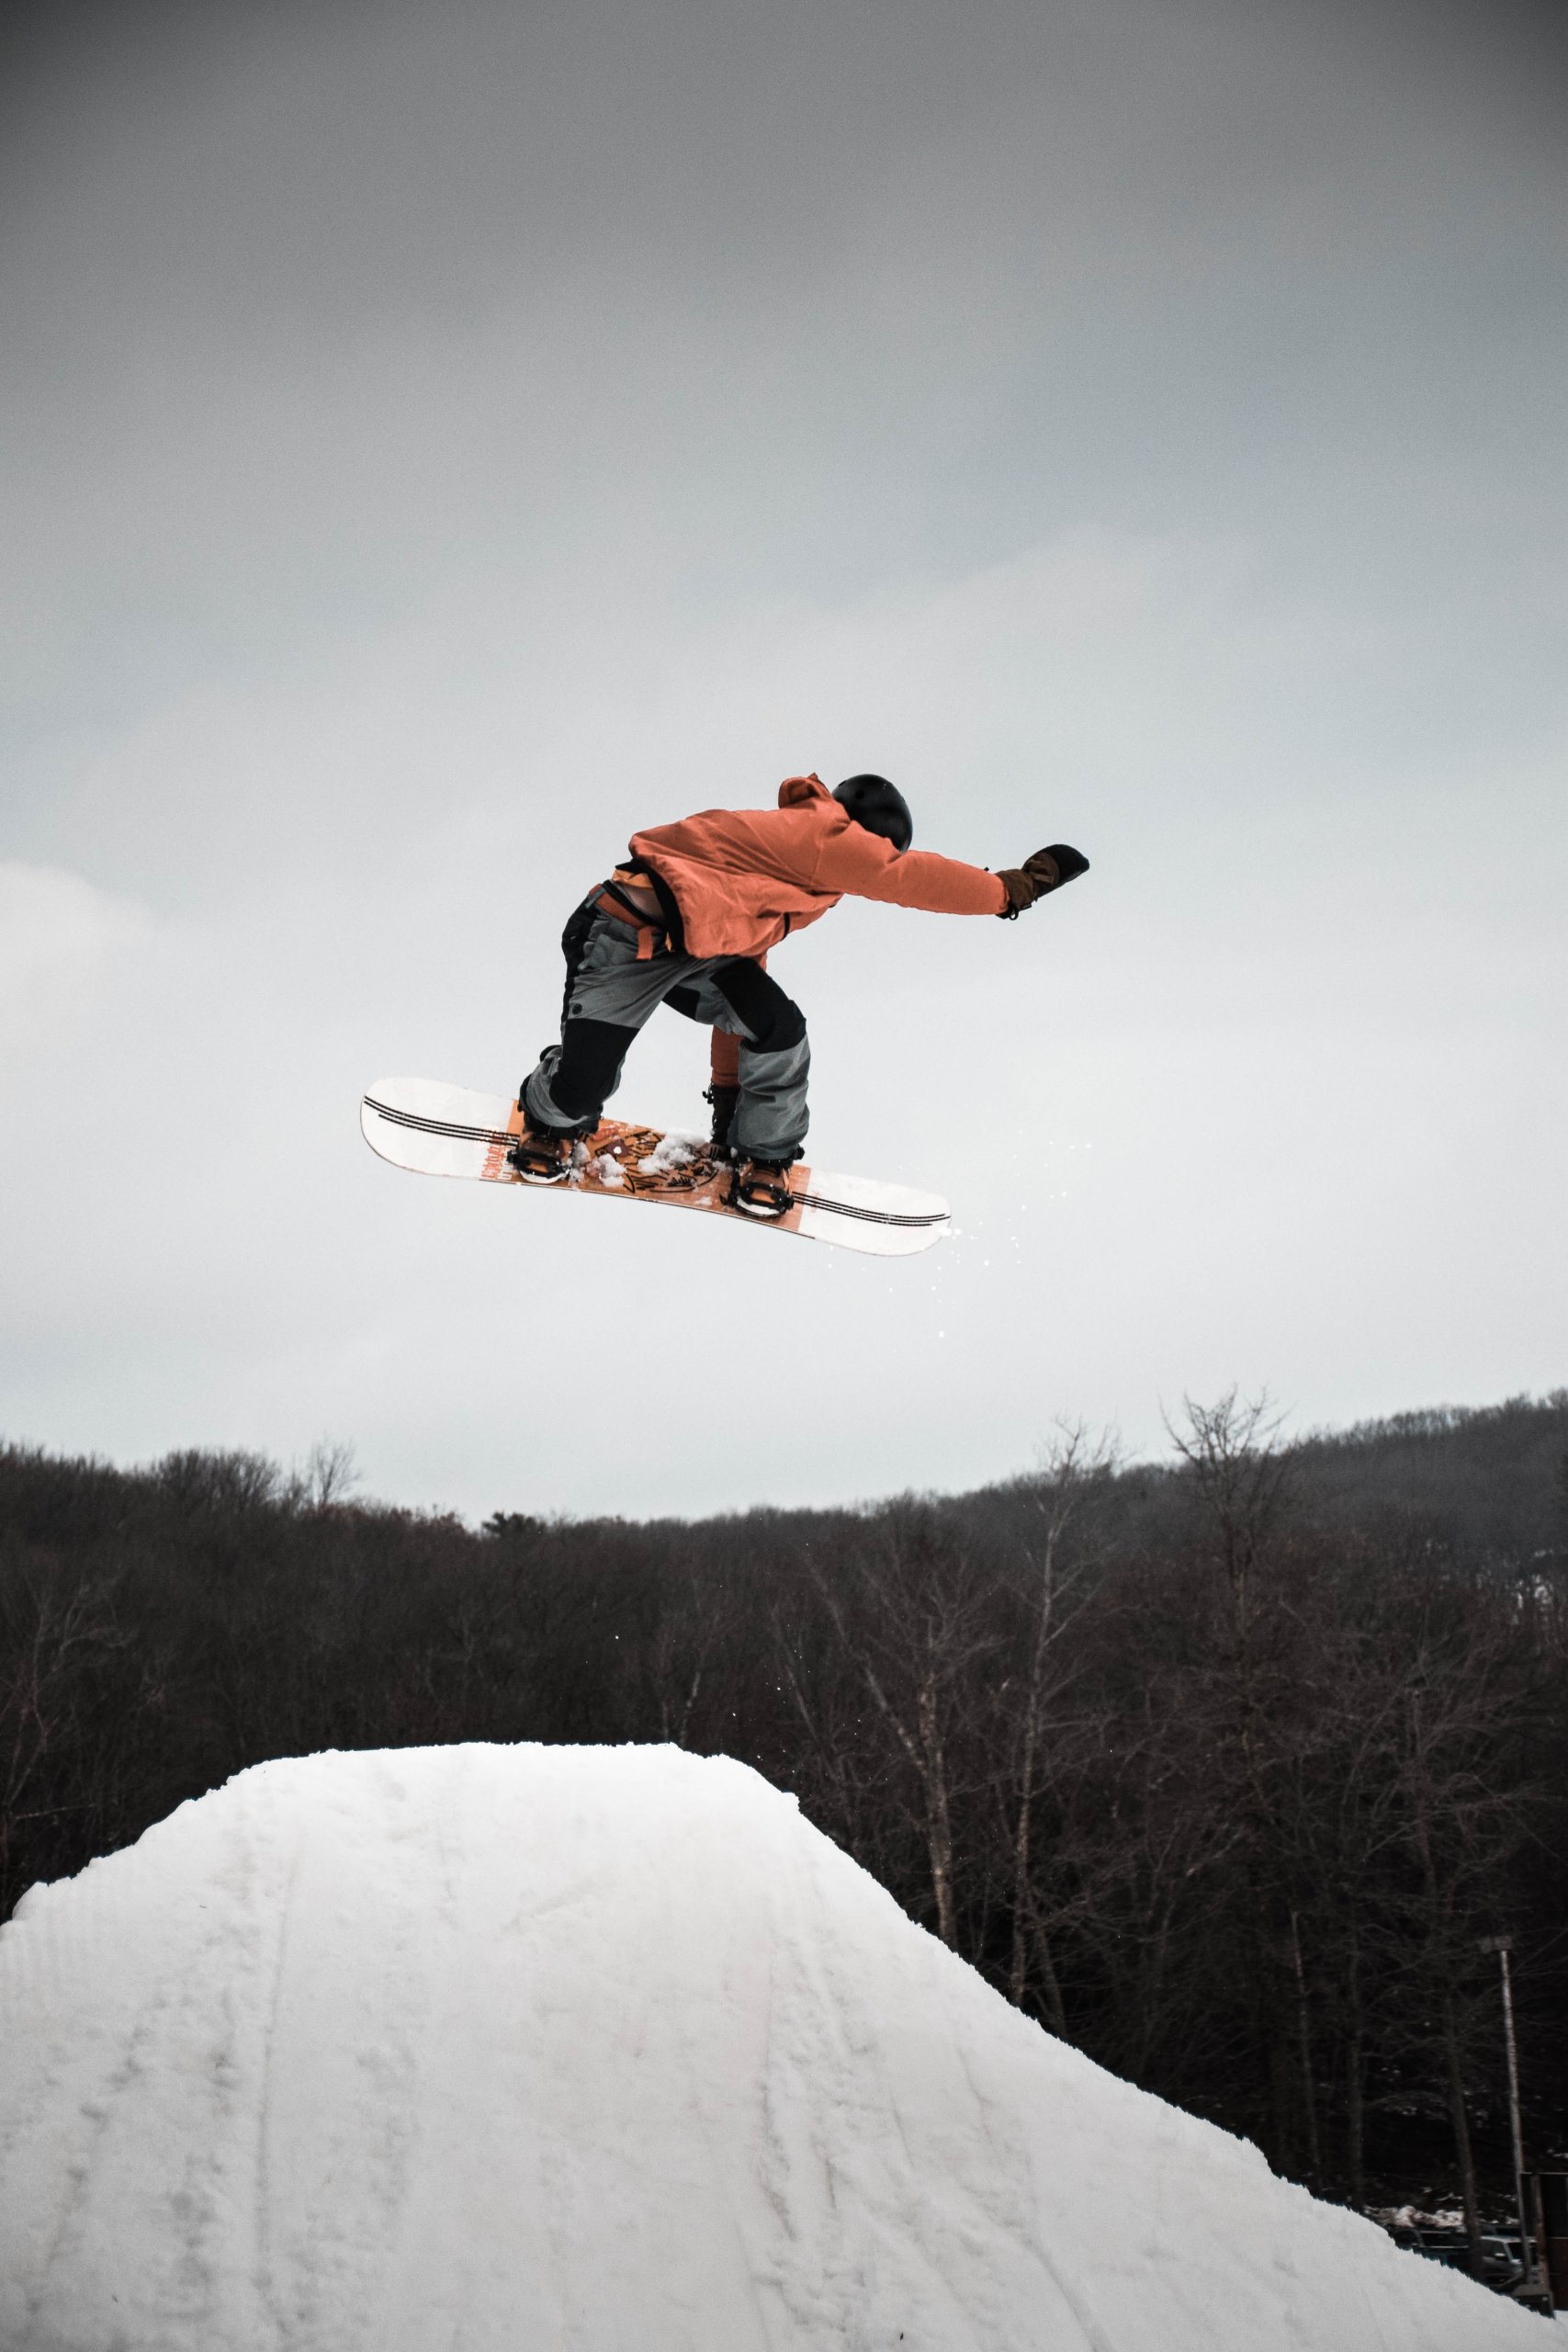 pexels image credit to Tyler Tornberg. Image of snowboarder jumping in air above snow